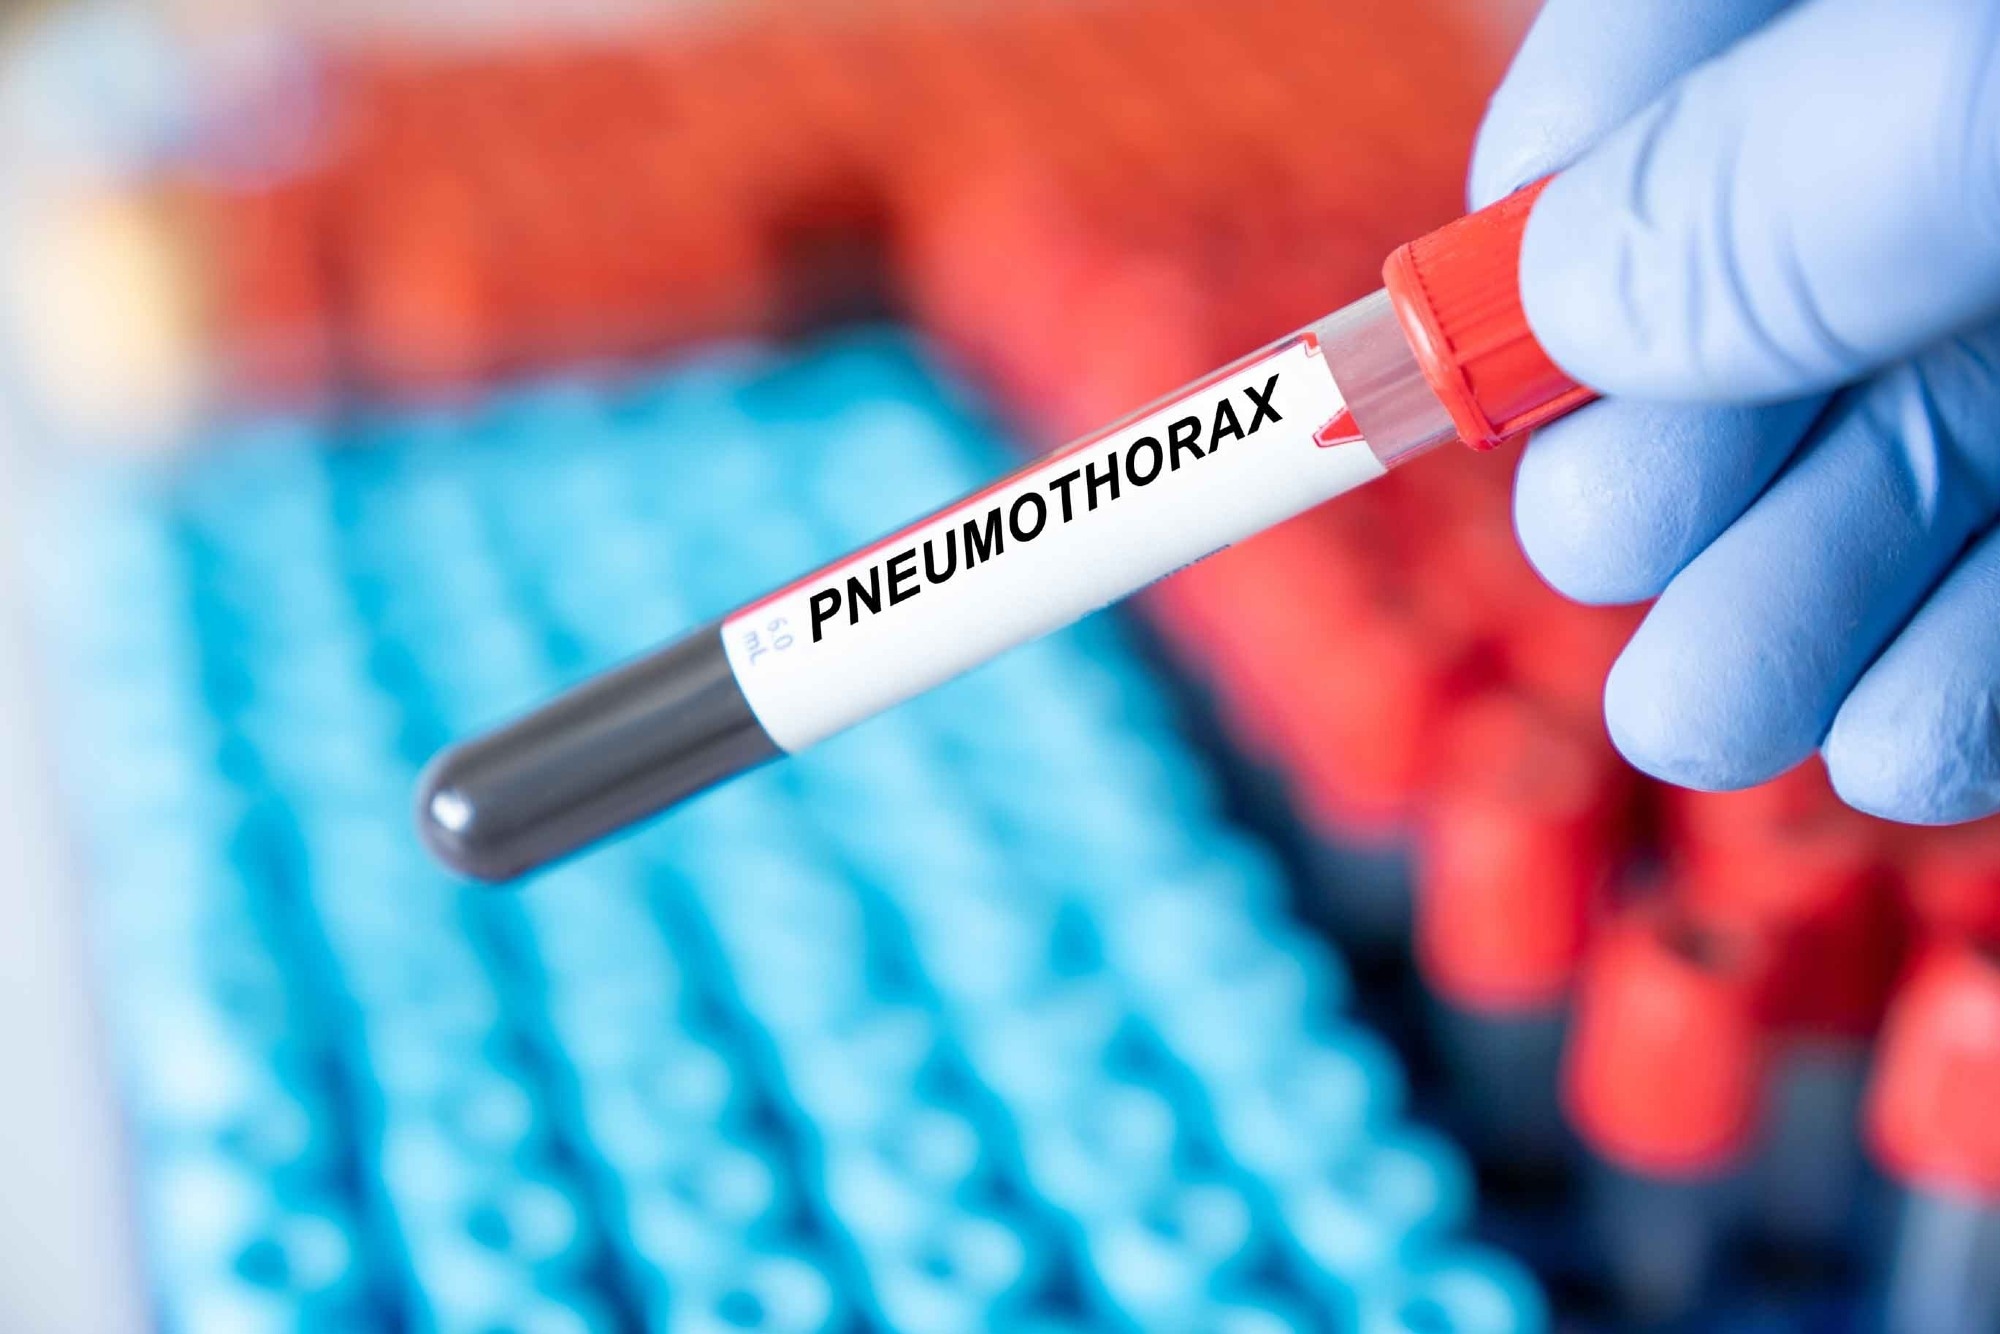 Pneumothorax prevalence in COVID-19 and influenza patients